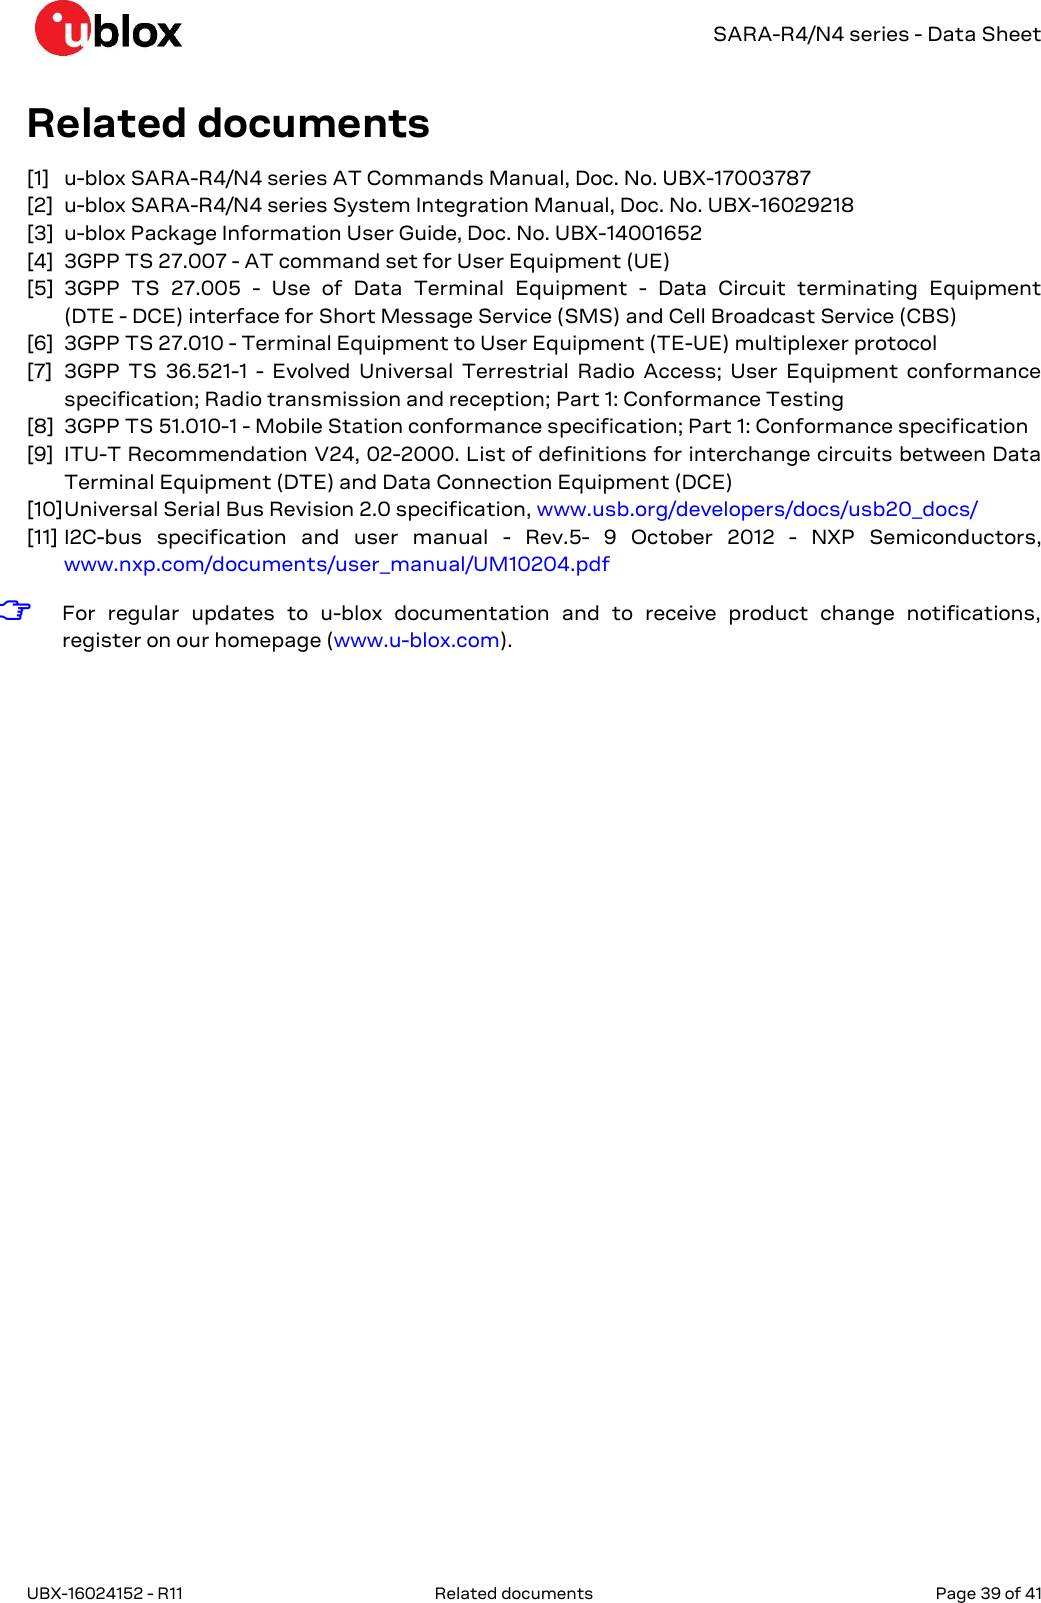   SARA-R4/N4 series - Data Sheet UBX-16024152 - R11  Related documents   Page 39 of 41      Related documents [1] u-blox SARA-R4/N4 series AT Commands Manual, Doc. No. UBX-17003787 [2] u-blox SARA-R4/N4 series System Integration Manual, Doc. No. UBX-16029218 [3] u-blox Package Information User Guide, Doc. No. UBX-14001652 [4] 3GPP TS 27.007 - AT command set for User Equipment (UE) [5] 3GPP  TS  27.005  -  Use  of  Data  Terminal  Equipment  -  Data  Circuit  terminating  Equipment  (DTE - DCE) interface for Short Message Service (SMS) and Cell Broadcast Service (CBS) [6] 3GPP TS 27.010 - Terminal Equipment to User Equipment (TE-UE) multiplexer protocol [7] 3GPP  TS  36.521-1  -  Evolved  Universal  Terrestrial  Radio  Access;  User  Equipment  conformance specification; Radio transmission and reception; Part 1: Conformance Testing [8] 3GPP TS 51.010-1 - Mobile Station conformance specification; Part 1: Conformance specification [9] ITU-T Recommendation V24, 02-2000. List of definitions for interchange circuits between Data Terminal Equipment (DTE) and Data Connection Equipment (DCE) [10] Universal Serial Bus Revision 2.0 specification, www.usb.org/developers/docs/usb20_docs/ [11] I2C-bus  specification  and  user  manual  -  Rev.5-  9  October  2012  -  NXP  Semiconductors, www.nxp.com/documents/user_manual/UM10204.pdf  ☞ For  regular  updates  to  u-blox  documentation  and  to  receive  product  change  notifications, register on our homepage (www.u-blox.com).  